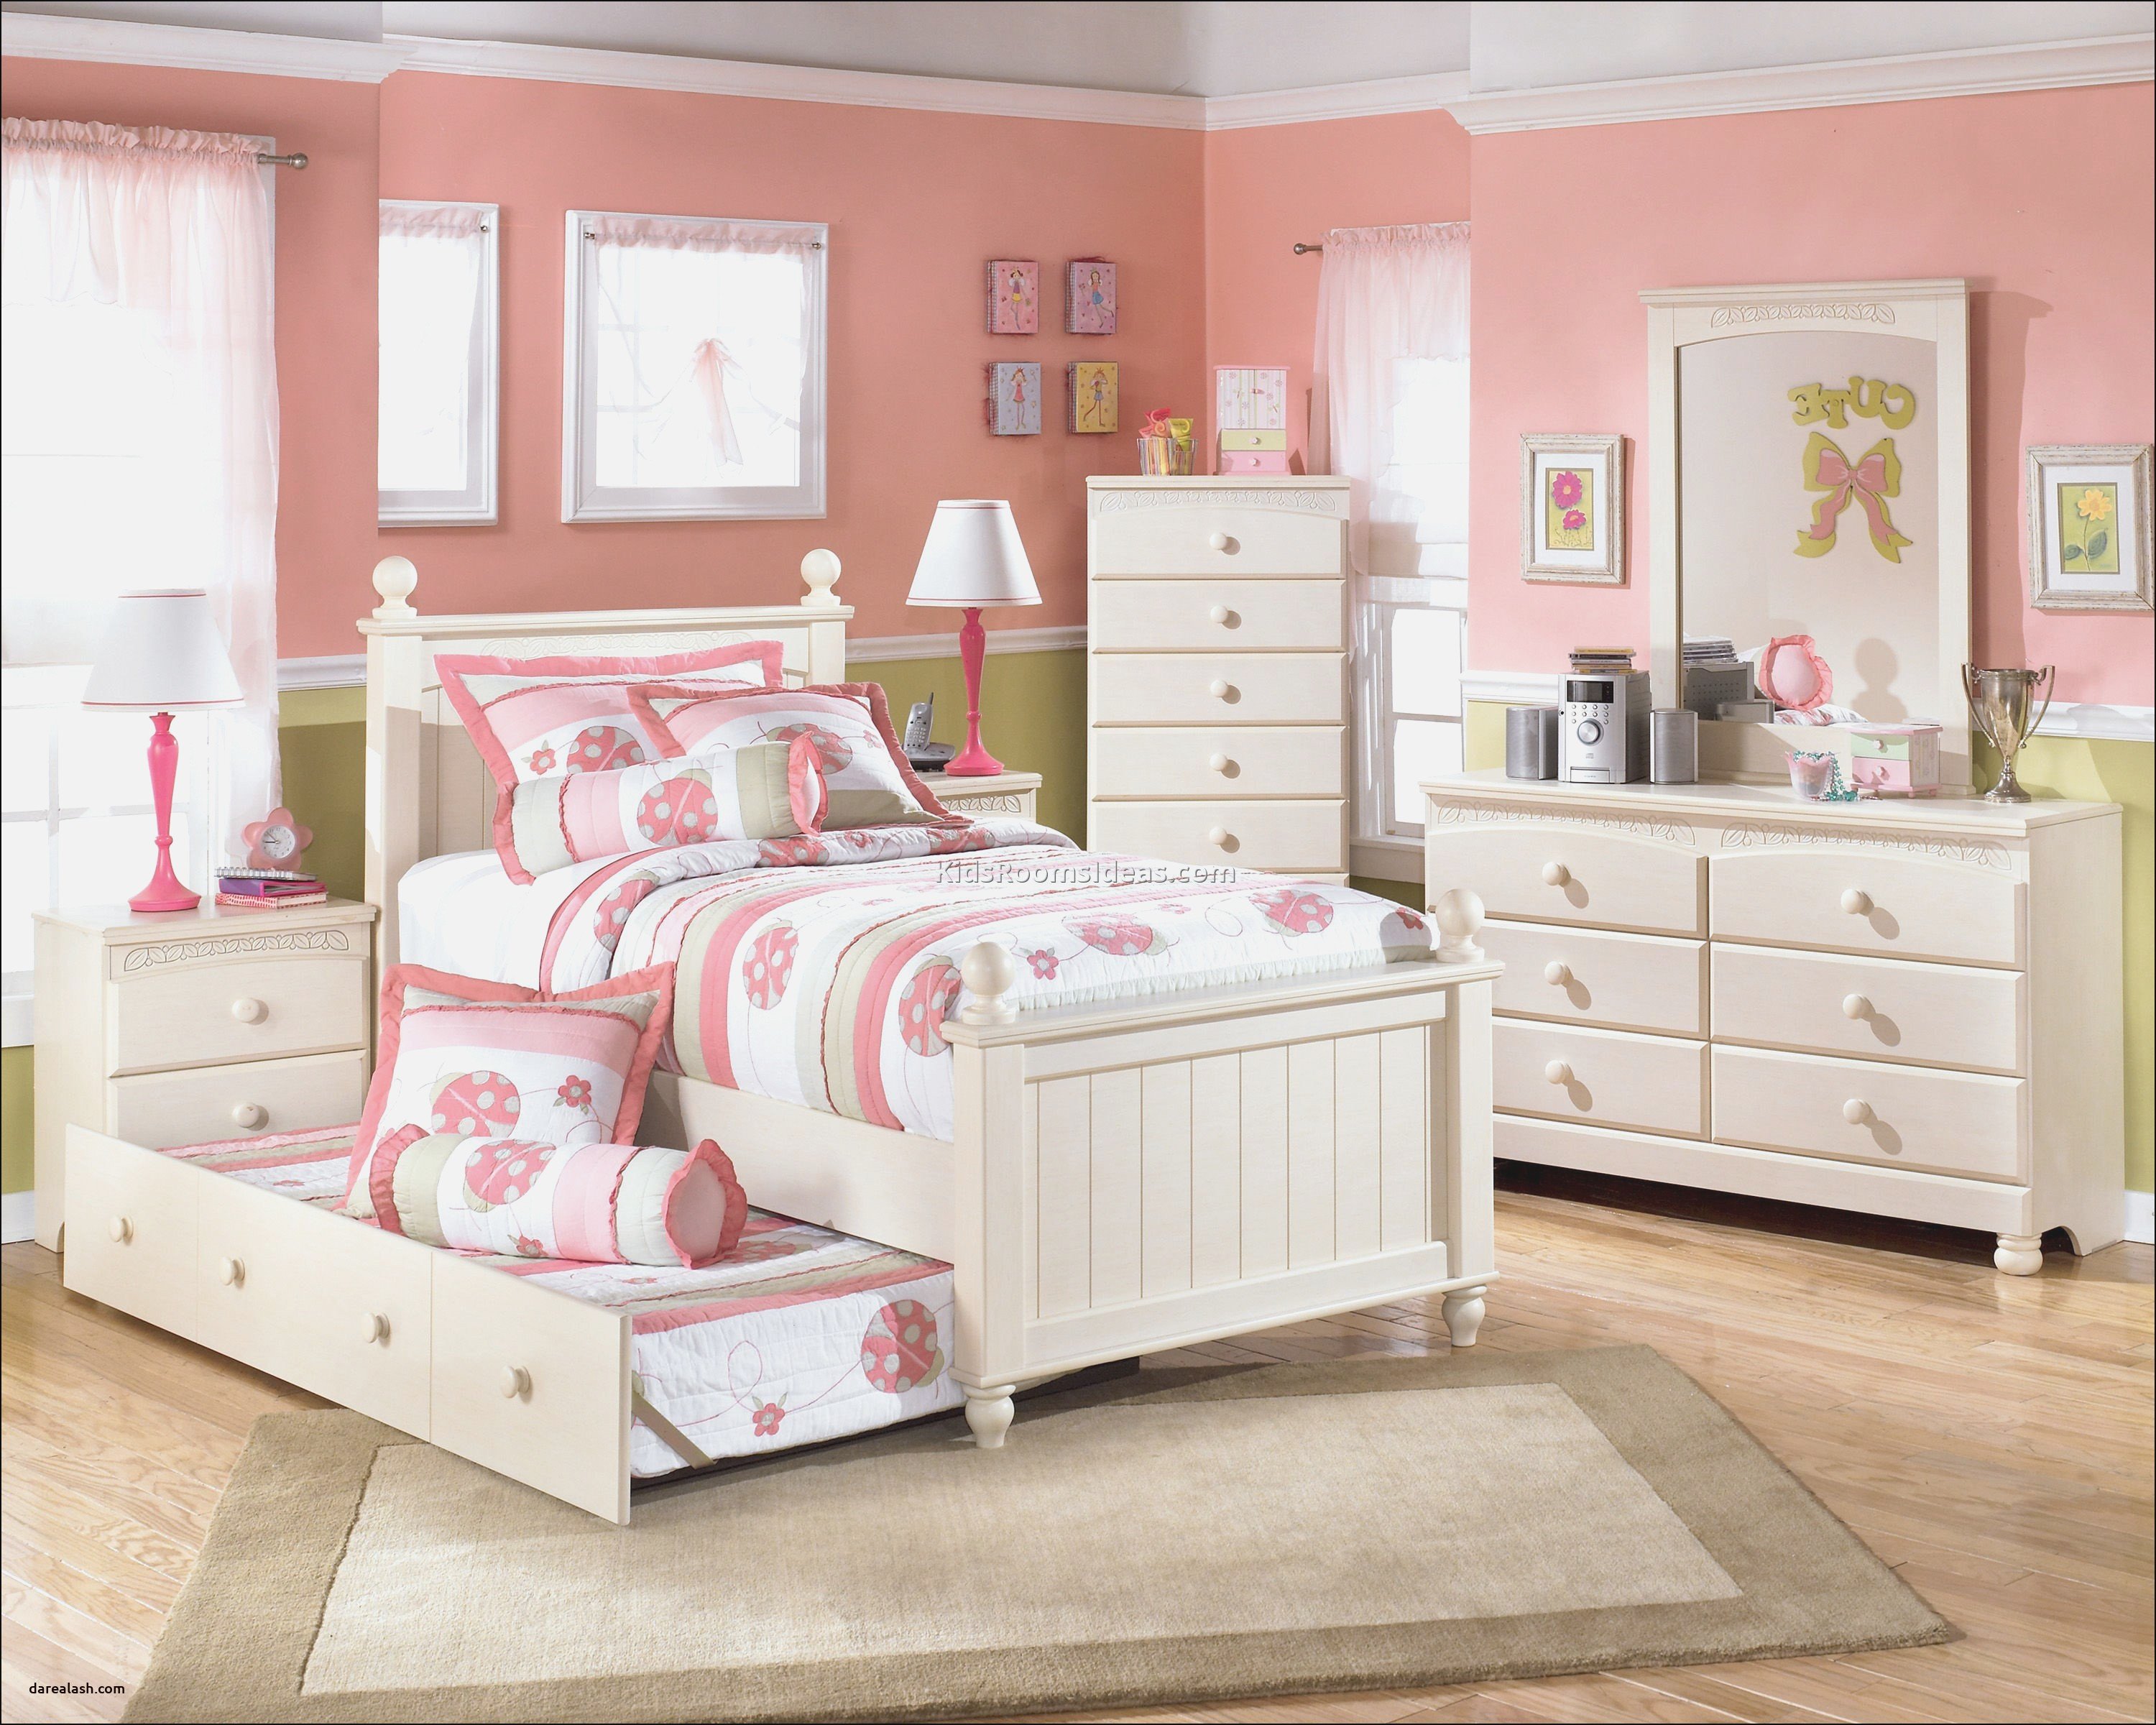 Rooms to Go Girl Bedroom Set Best Of Bedroom Charming Roomstogokids with Beautiful Decor for